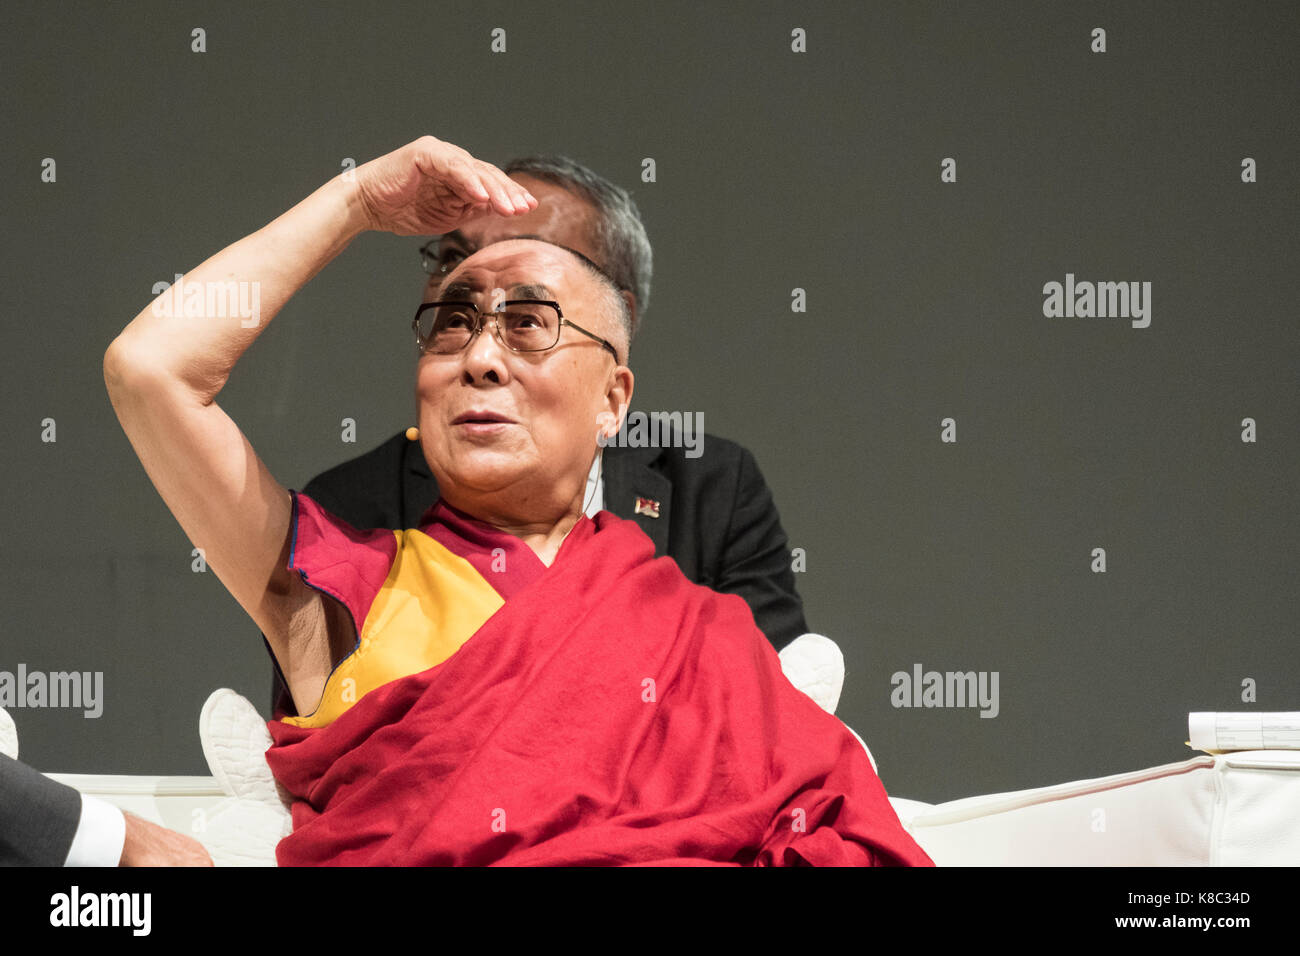 Palermo, Italy. 18th Sep, 2017. The conference in Palermo of the XIV Dalai Lama Tenzin Gyatso. XIV Dalai Lama Tenzin Gyatso returns to Palermo. Joy as an inspiration to invoke peace. After more than twenty years, XIV Dalai Lama Tenzin Gyatso, Tibet's spiritual leader and Nobel Peace Prize, returns to the city of Palermo. Credit: Gianfranco Spatola/Pacific Press/Alamy Live News Stock Photo